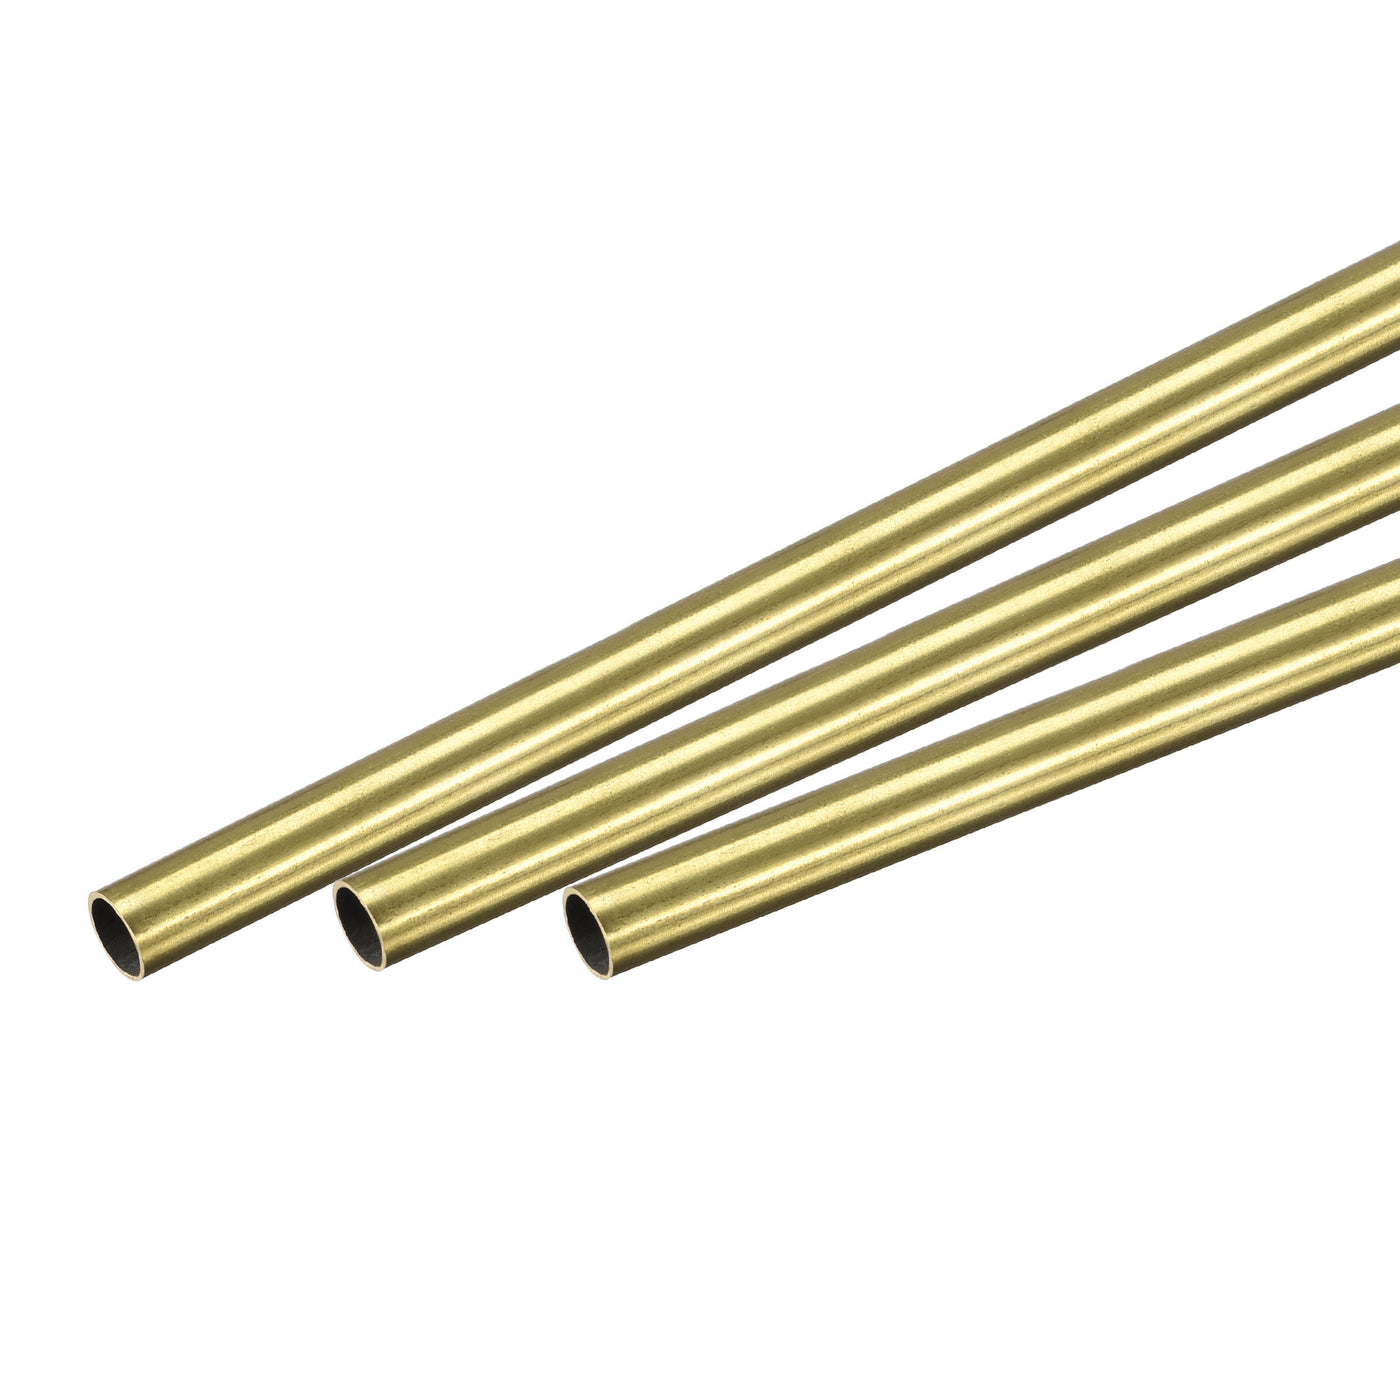 uxcell Uxcell 3Pcs 4mm x 0.2mm x 400mm Seamless Straight Brass Tube for Industry DIY Projects